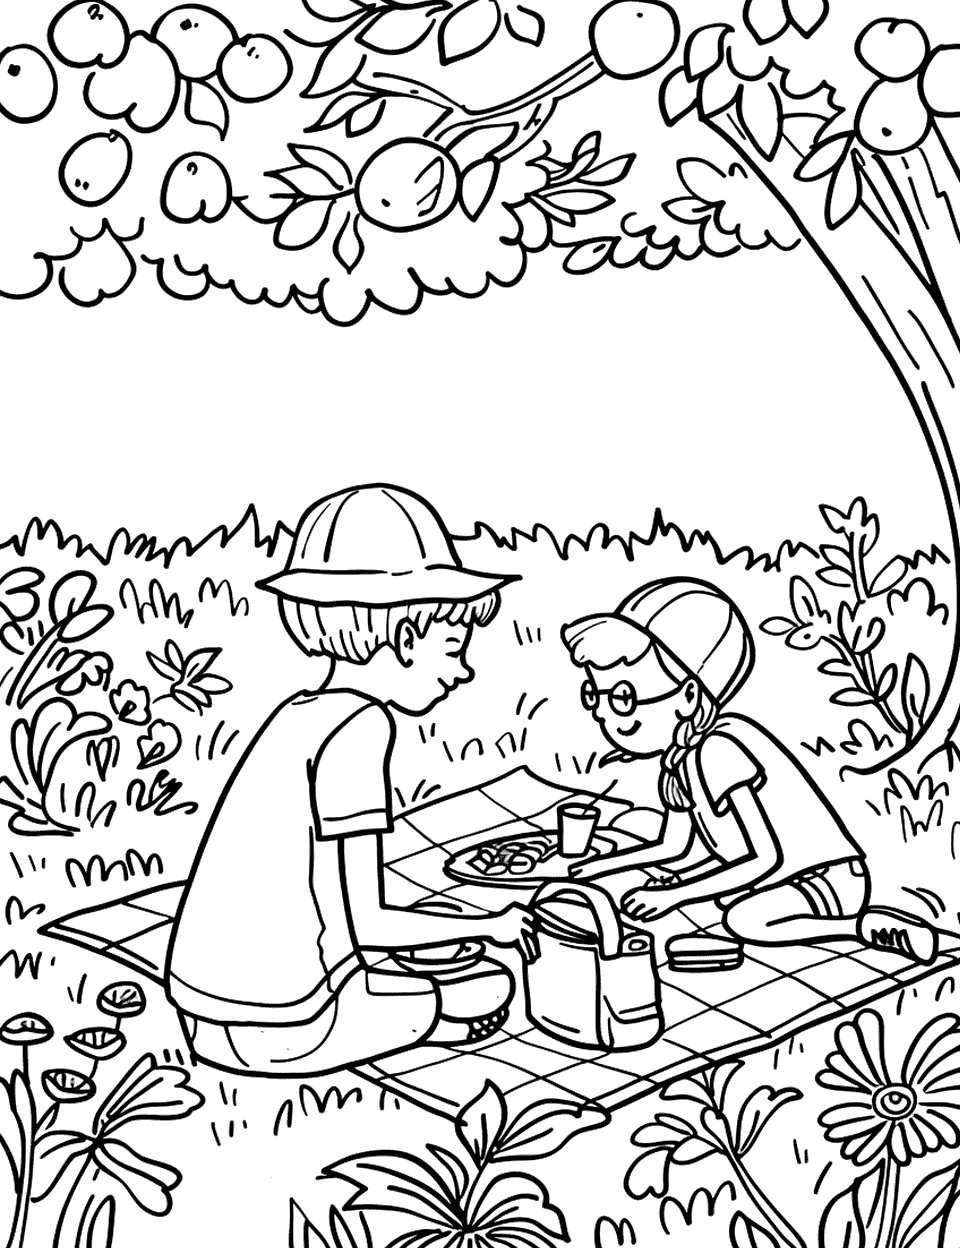 Garden Picnic Coloring Page - A family enjoying a picnic on a blanket in the middle of a large, sunny garden.